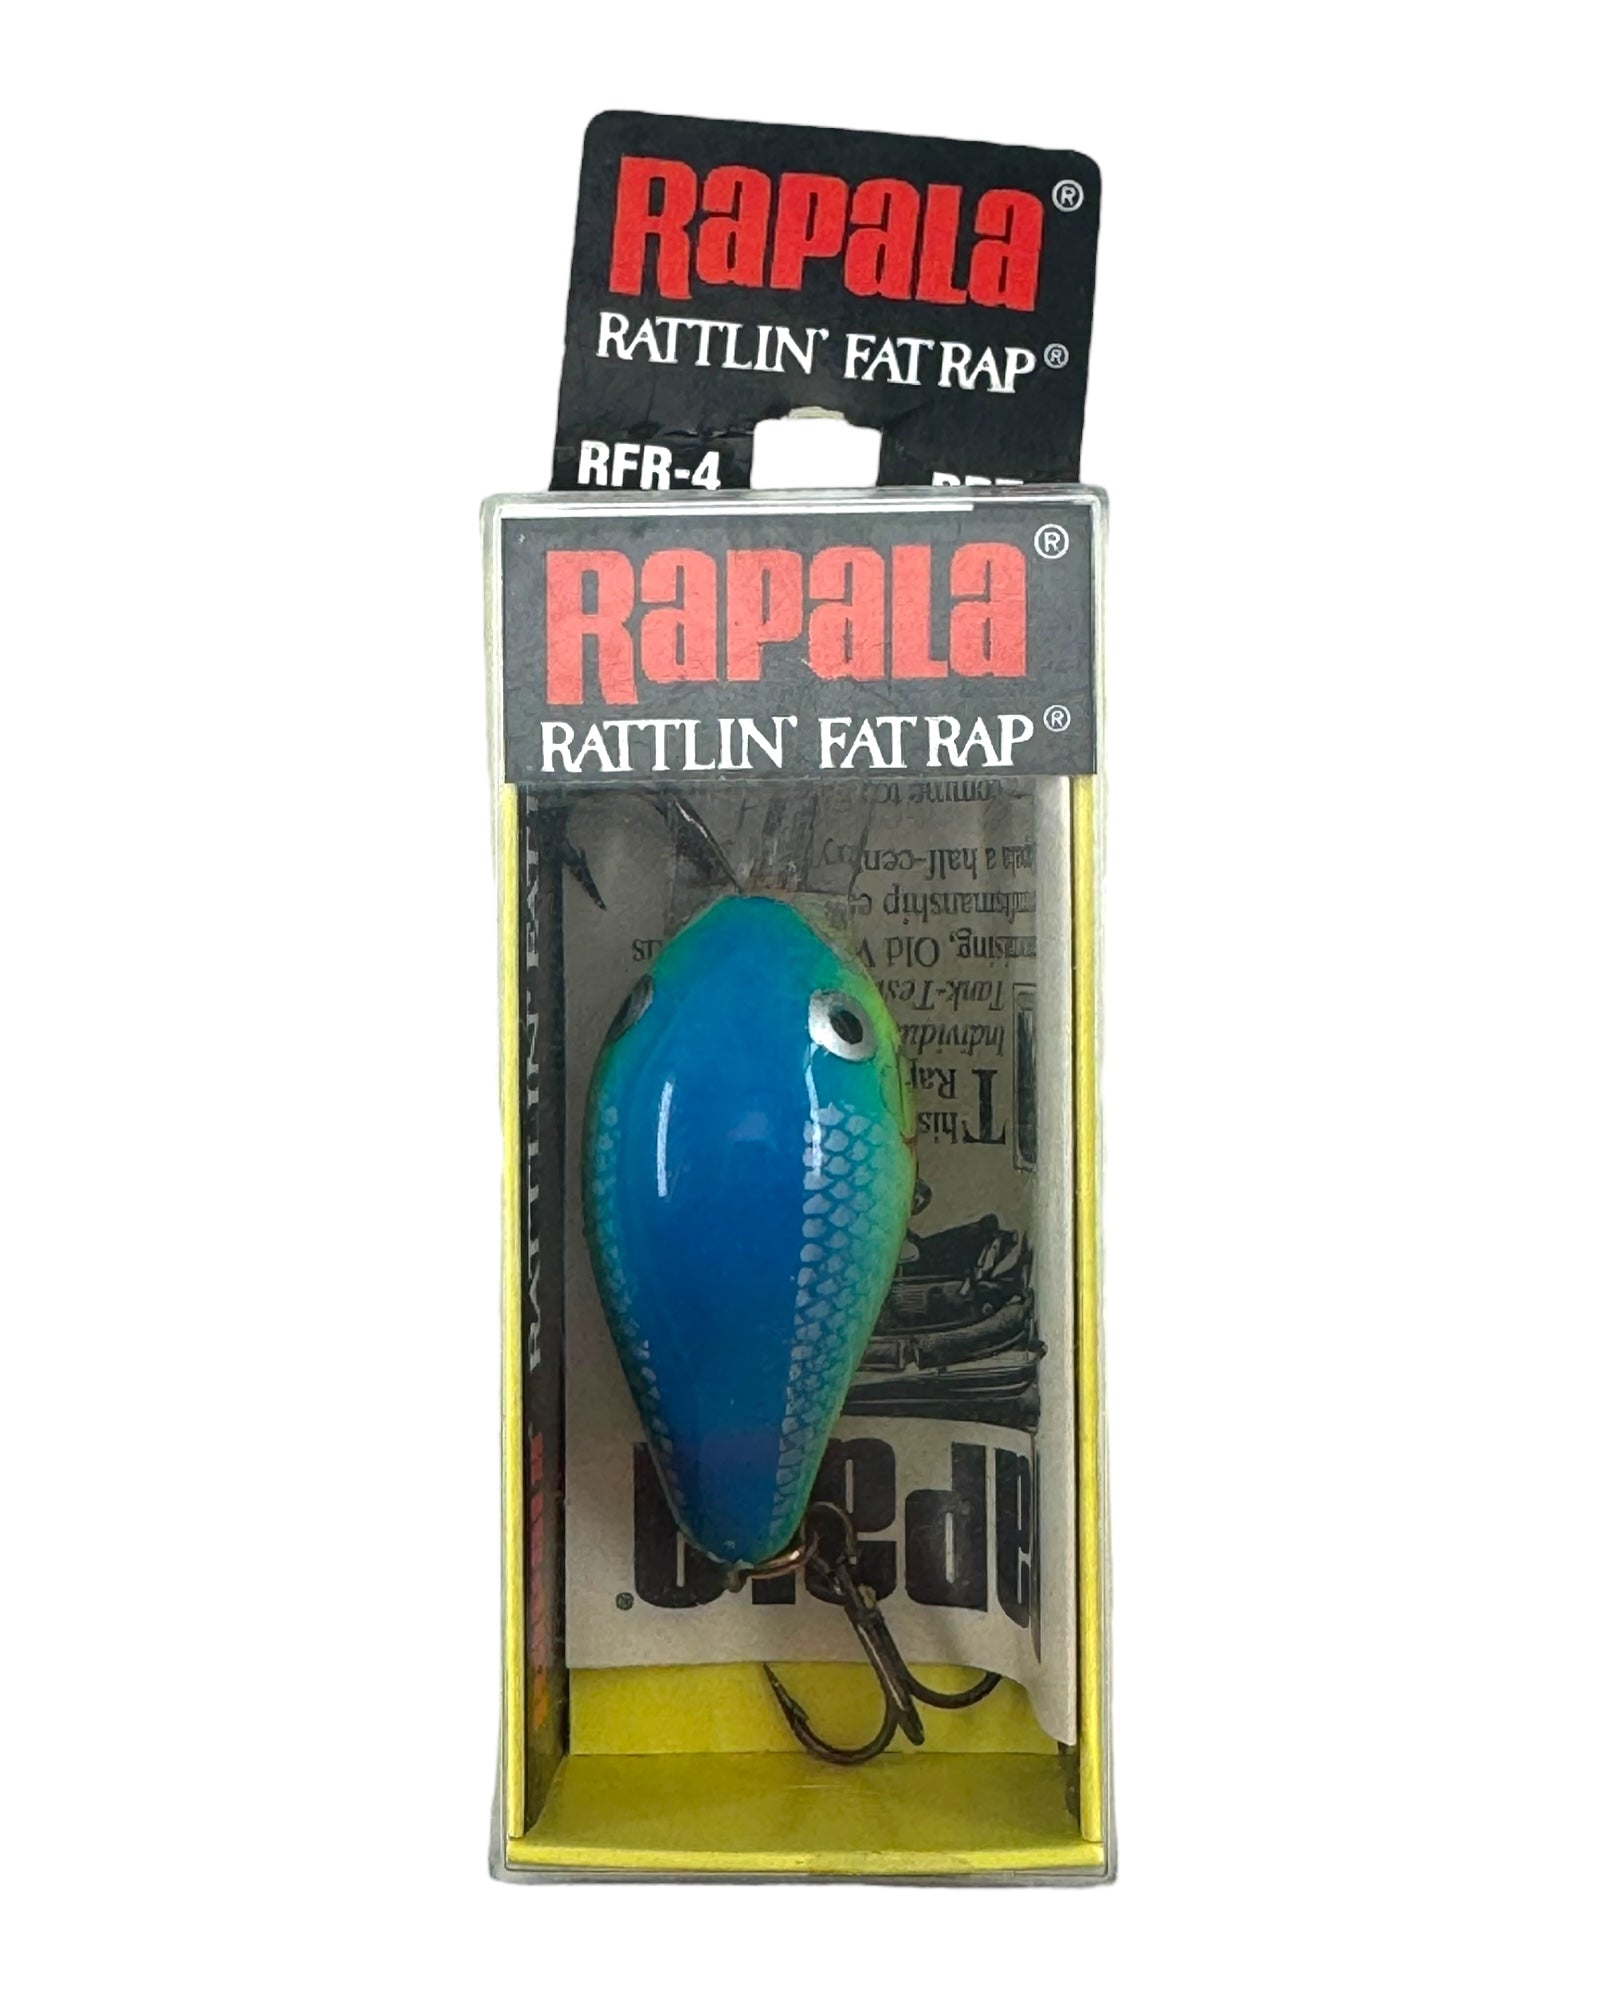 RAPALA RATTLIN' FAT RAP Size 4 Fishing Lure • RFR-4 PARROT – Toad Tackle